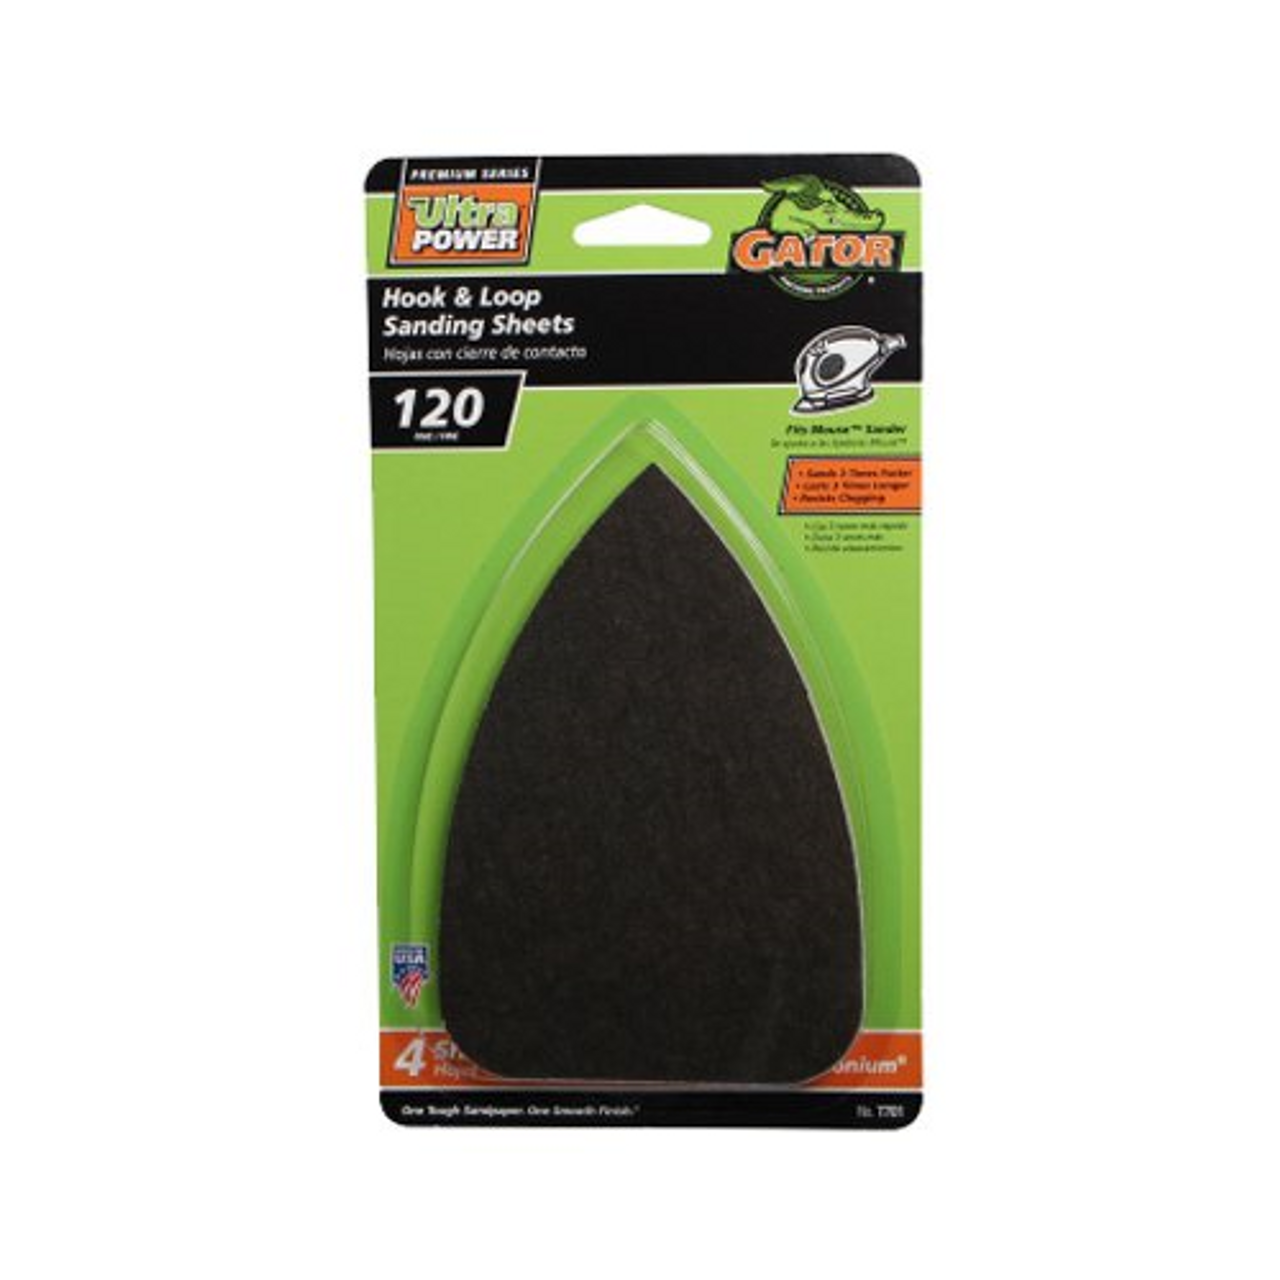 Gator 7701 120 Grit Mouse Refill, 4-Pack, 3.5 inch x 5 inch